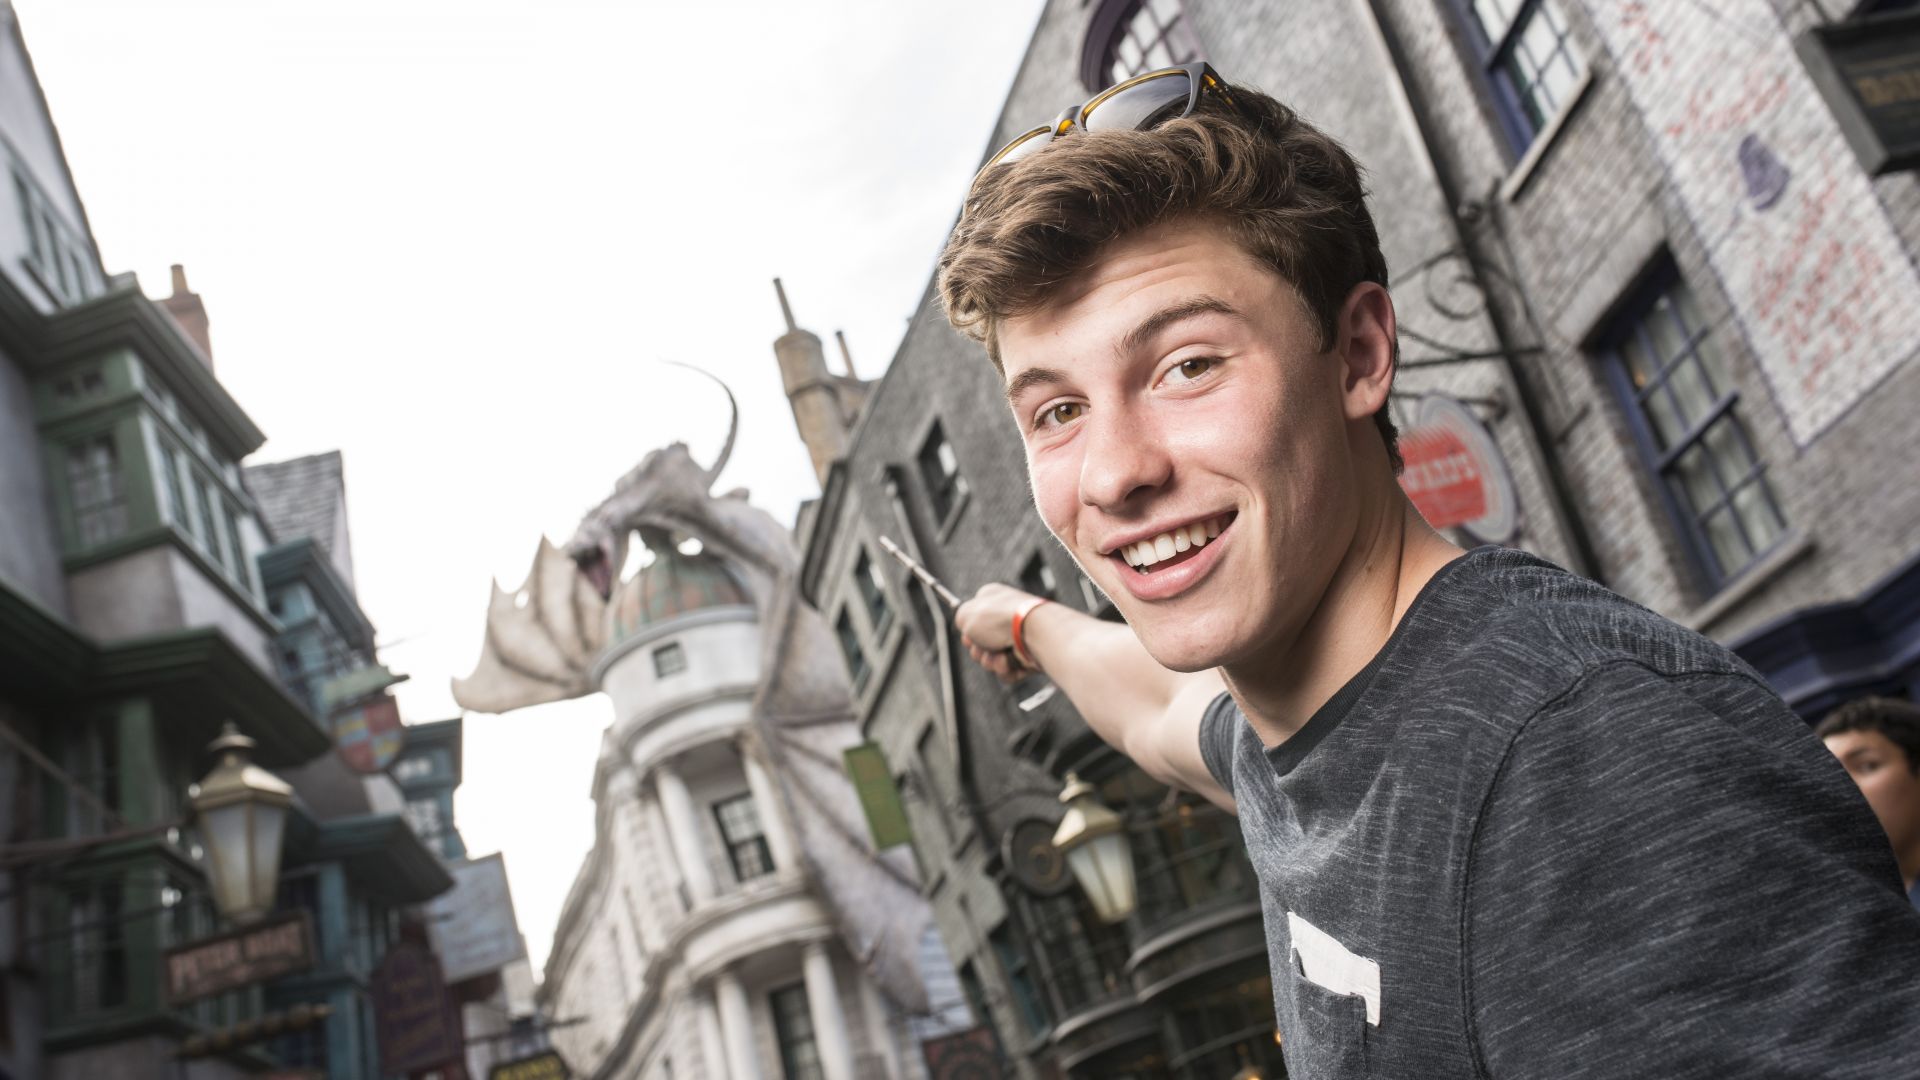 Shawn At The Harry Potter World - Shawn Mendes Harry Potter World - HD Wallpaper 